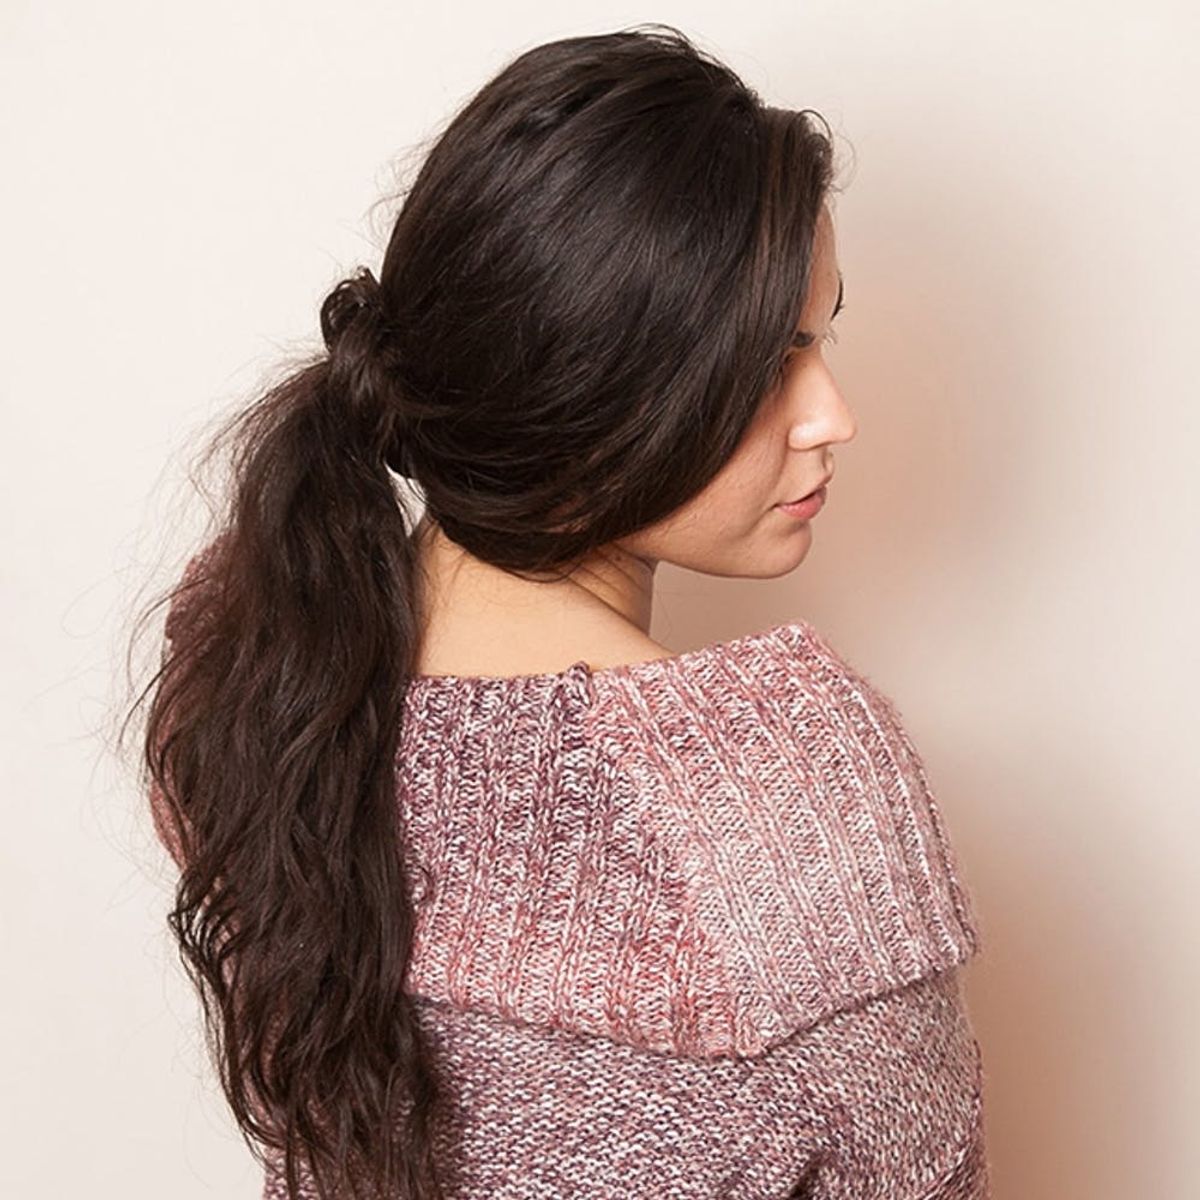 How to Hack a Ponytail Without an Elastic